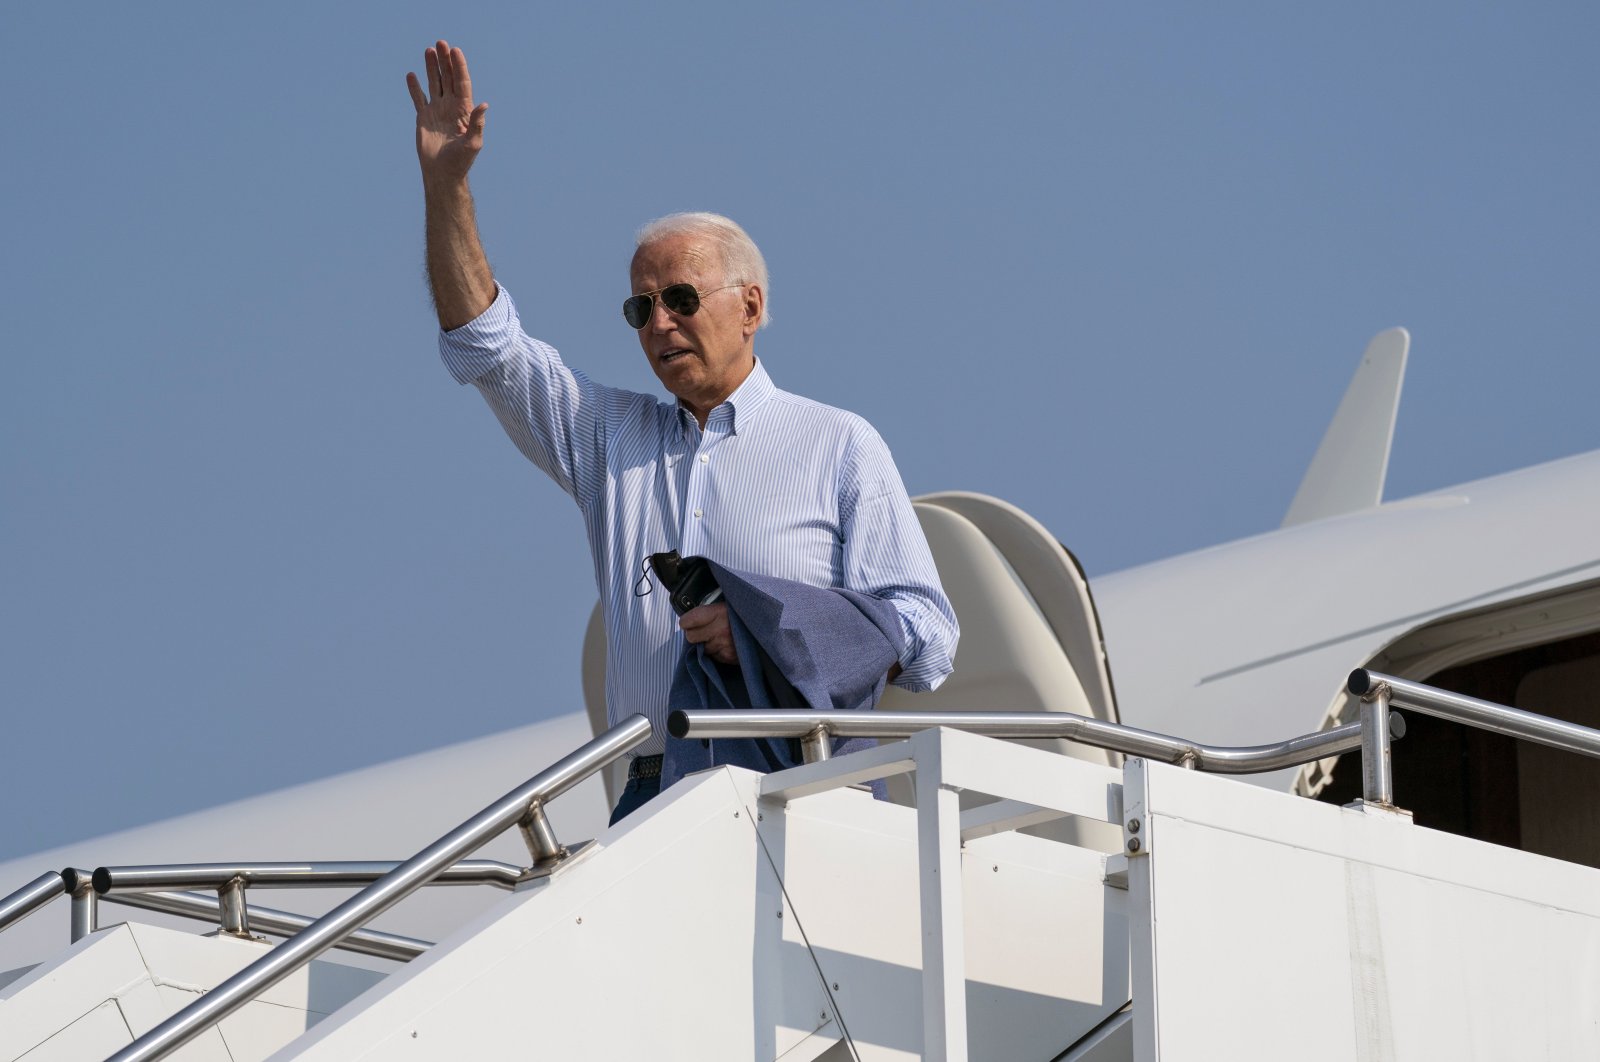 U.S. President Joe Biden waves as he boards Air Force One upon departure from Cherry Capital Airport in Traverse City, Michigan, U.S., July 3, 2021. (AP Photo)